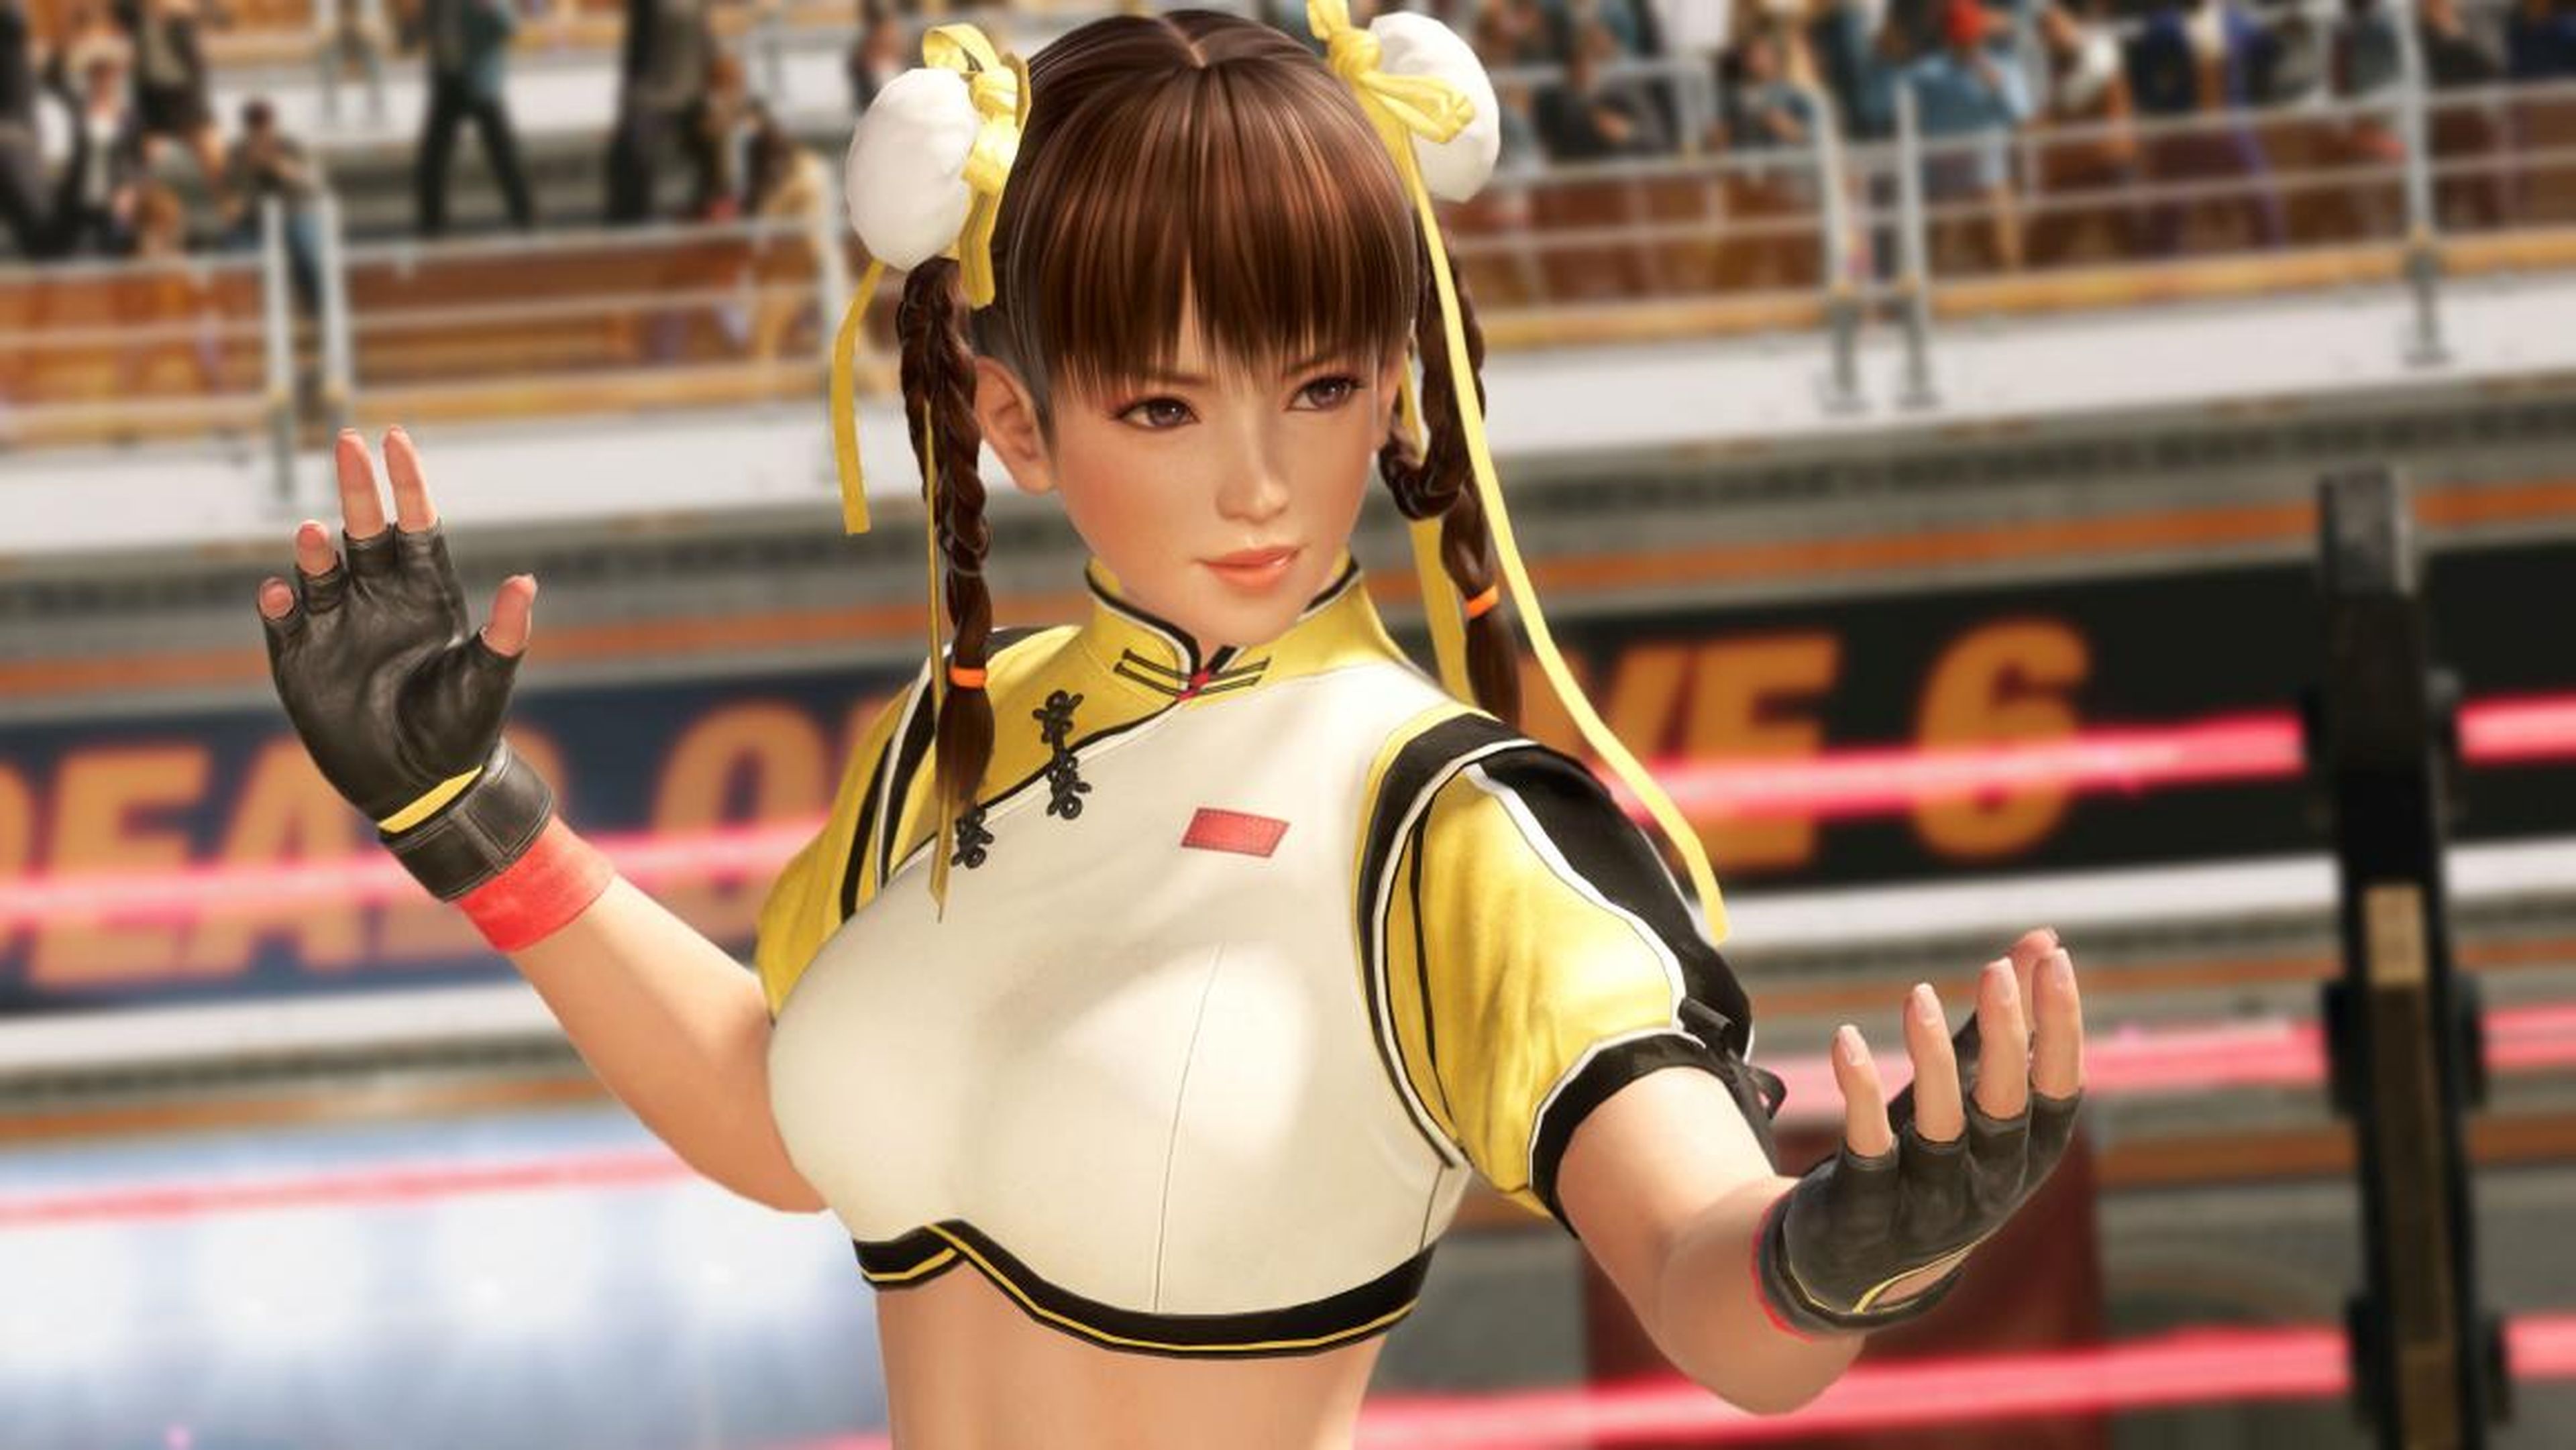 9. "Dead or Alive 6"